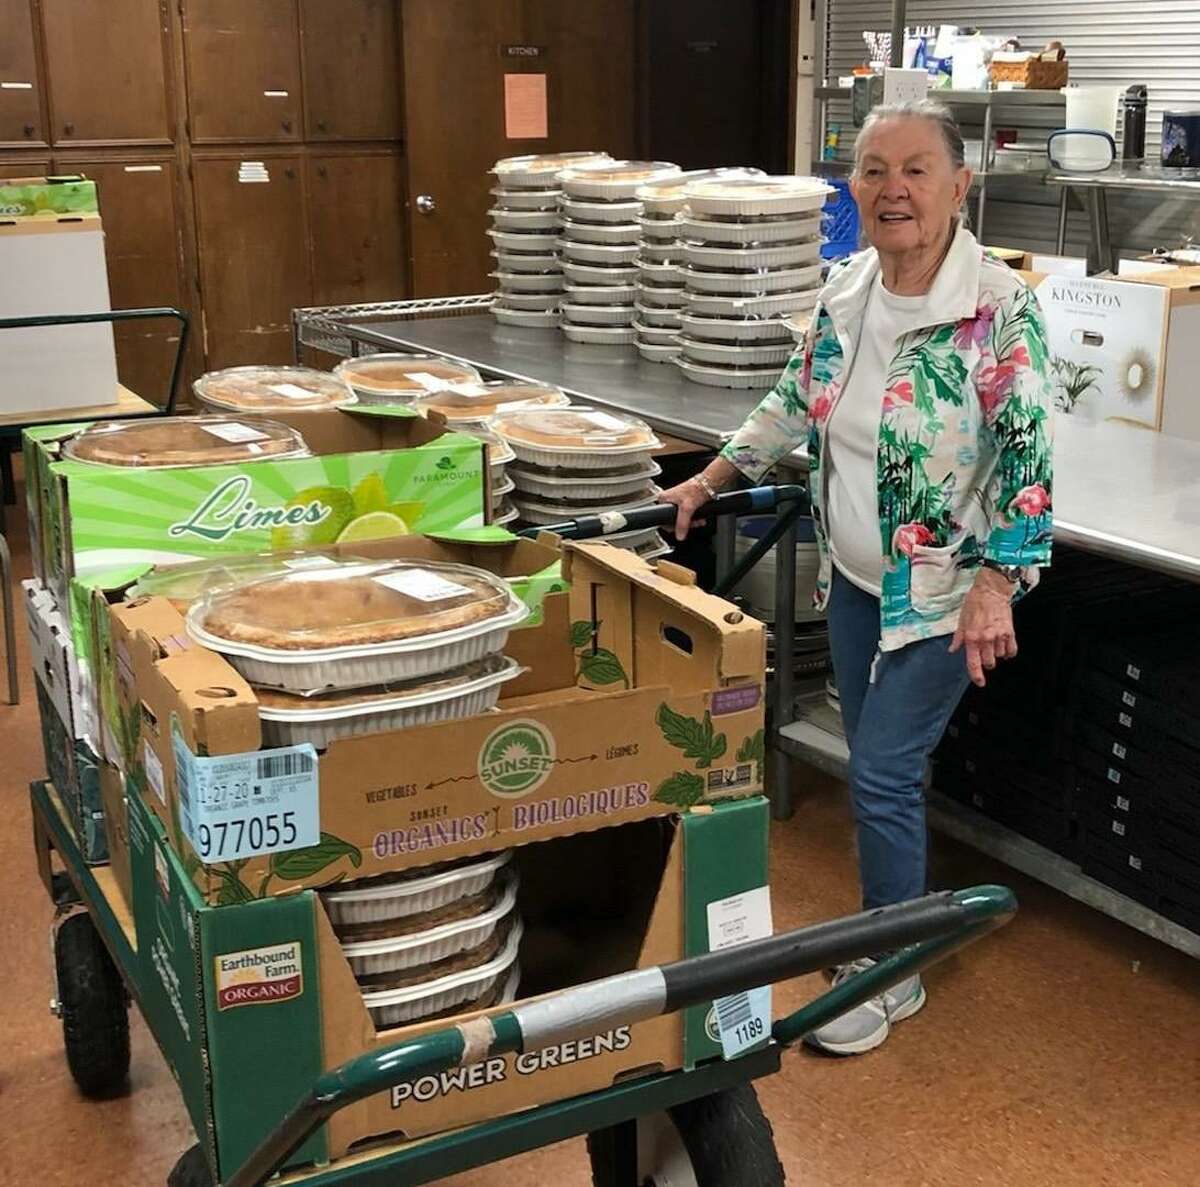 A Keep Us Fed volunteer with donated baked goods from Costco following Thanksgiving. They were distributed to five partner organizations across the county.